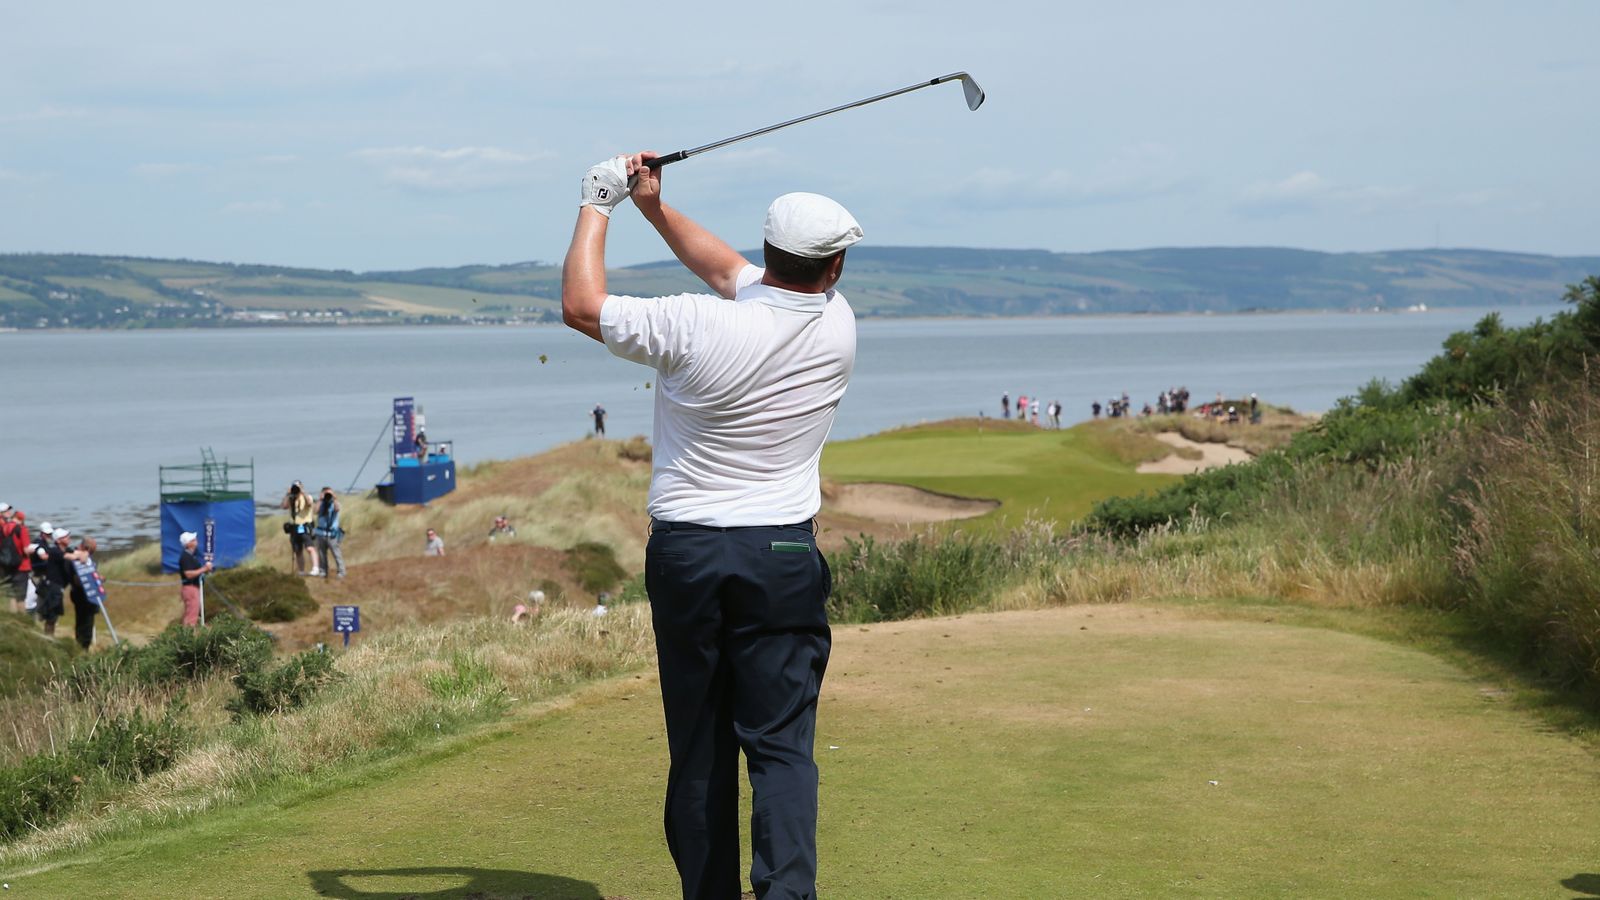 Scottish Open at Castle Stuart in 2016, possibly to Rory McIlroy's ...